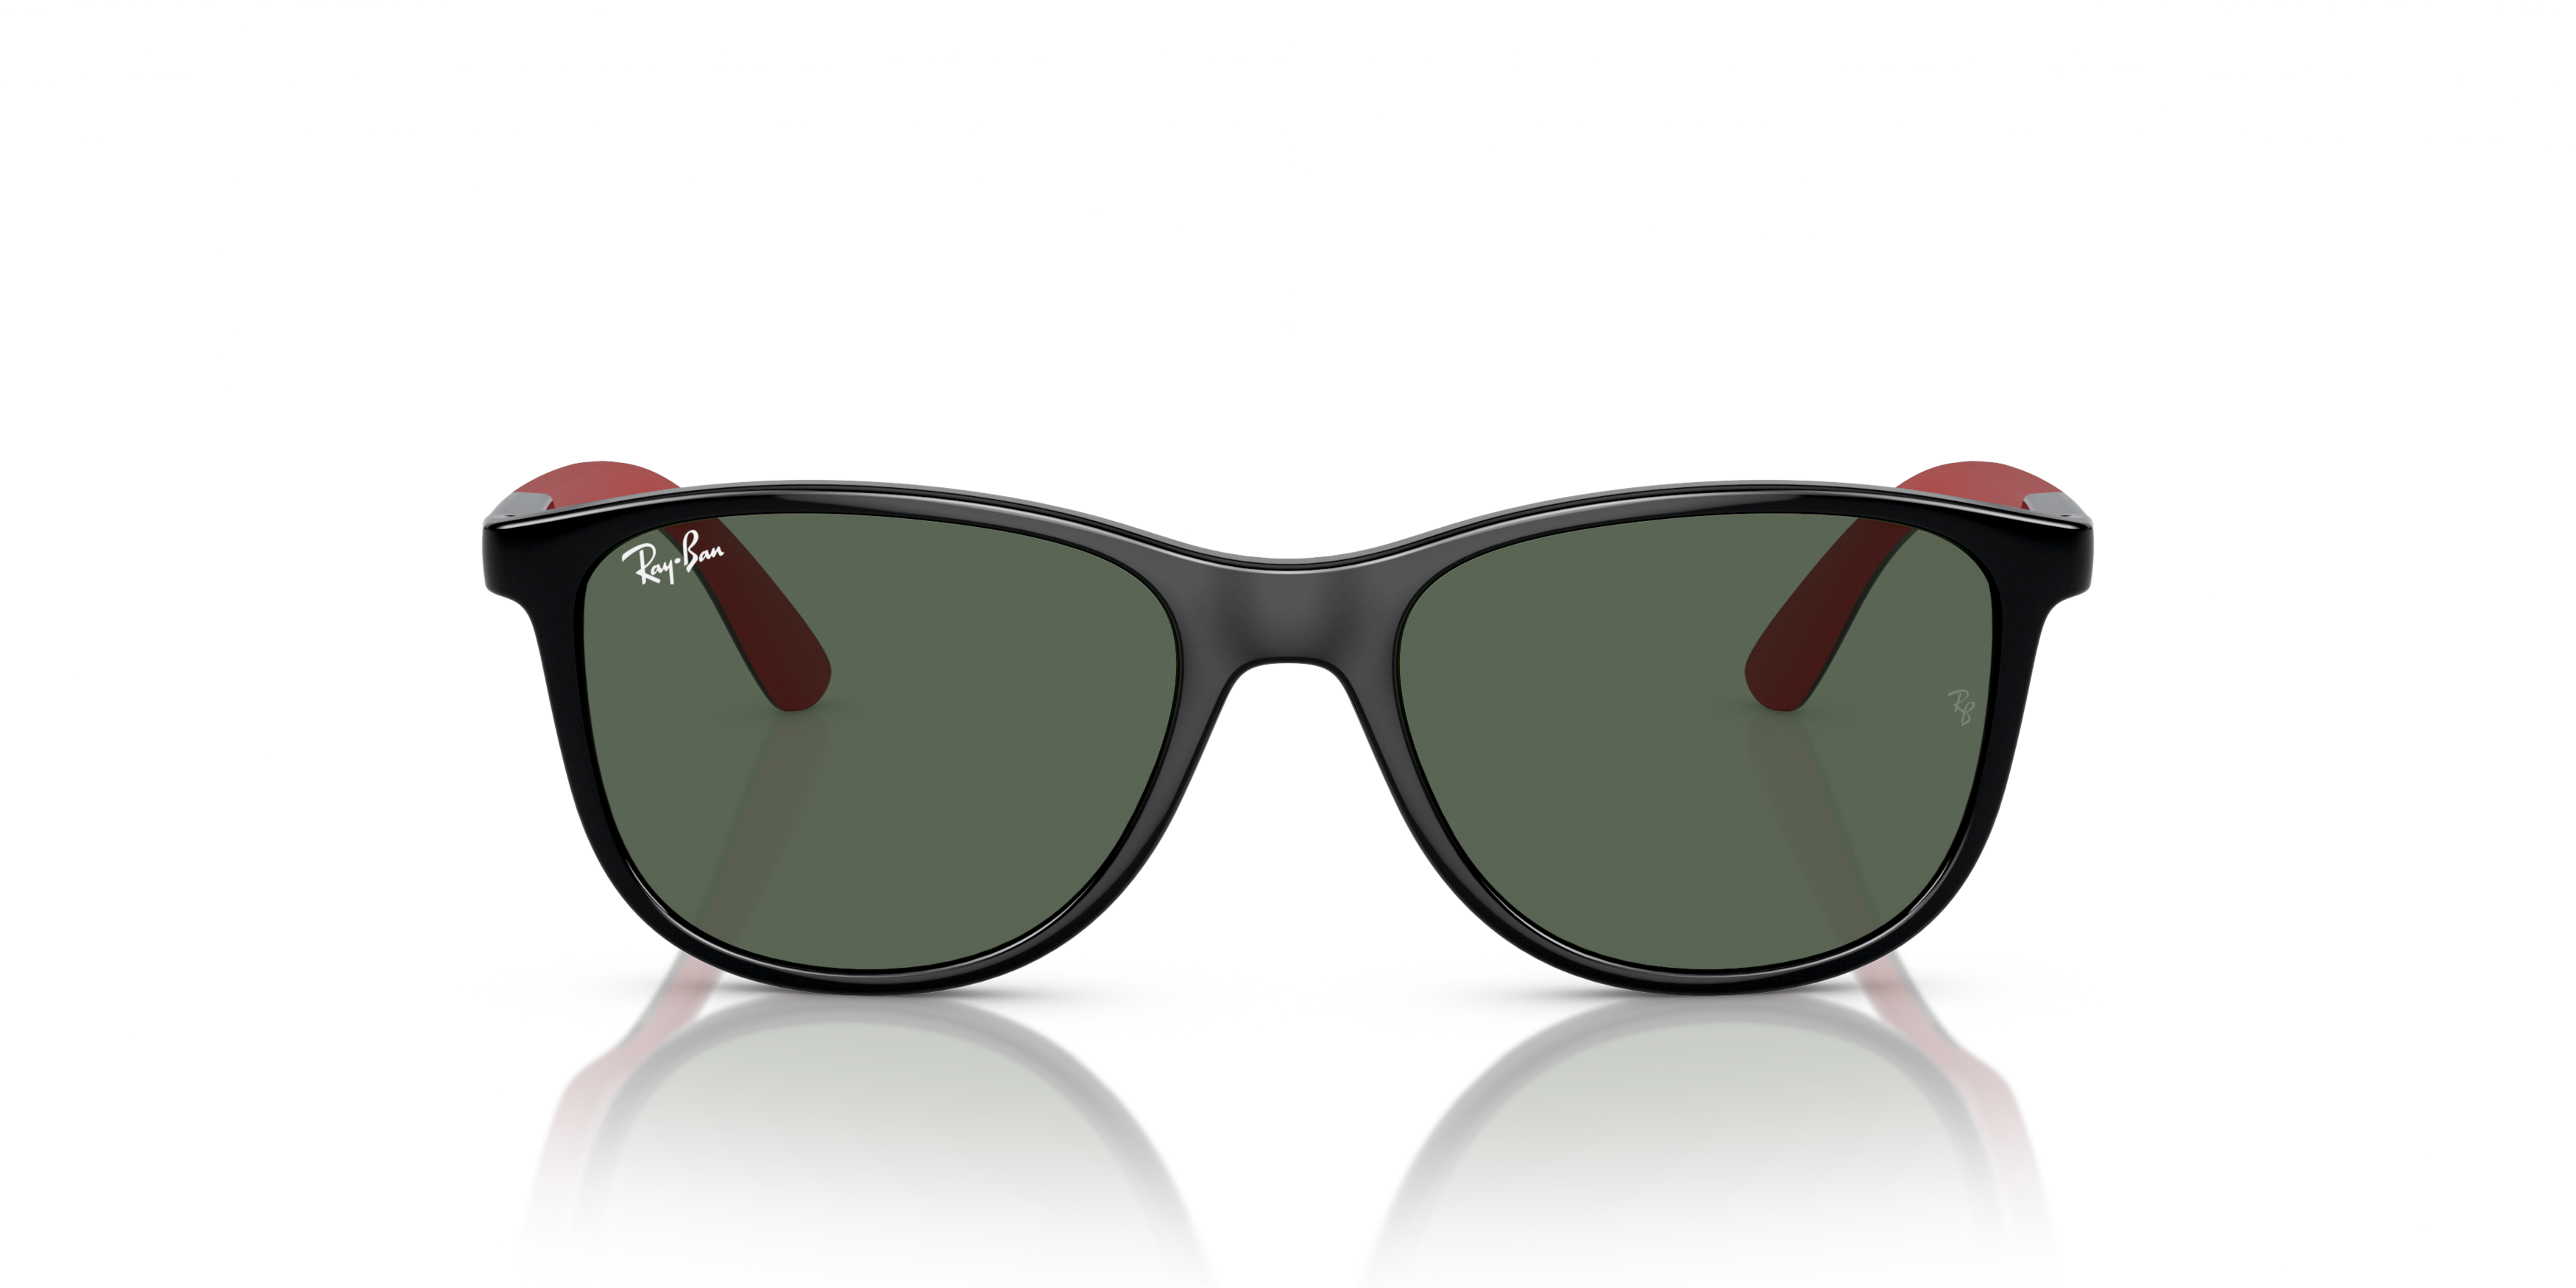 [products.image.front] RAY-BAN RJ9077S 713171